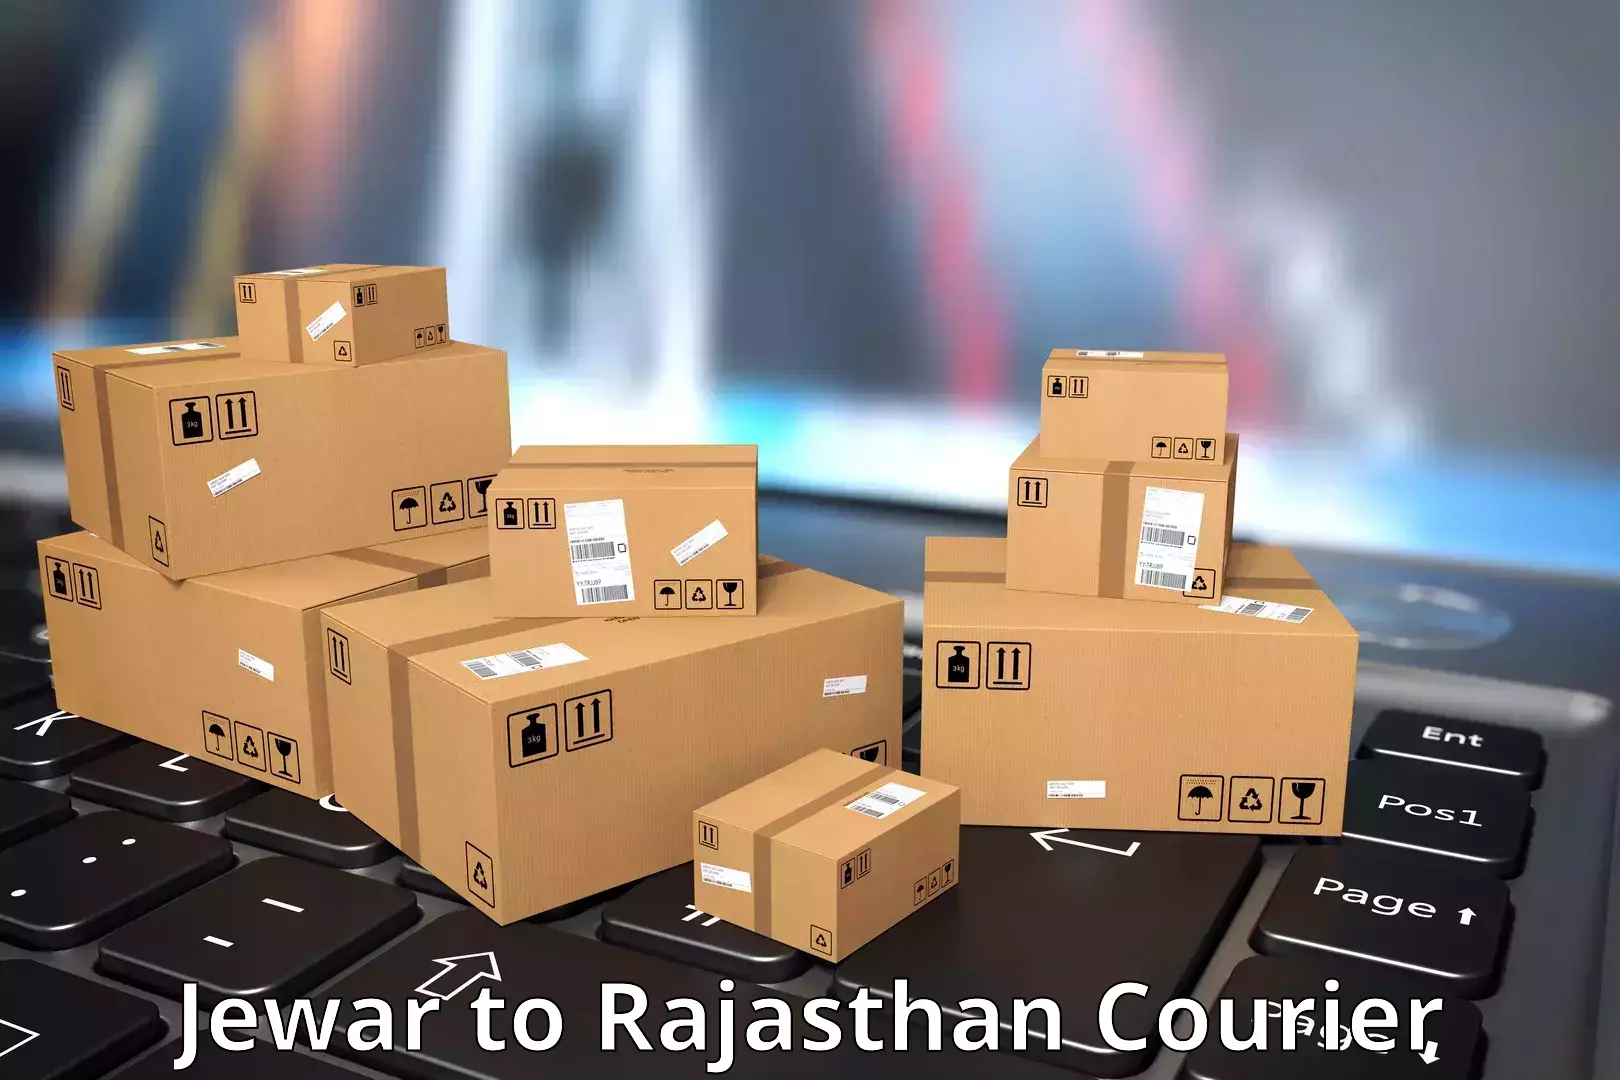 End-to-end delivery Jewar to Rajgarh Rajasthan